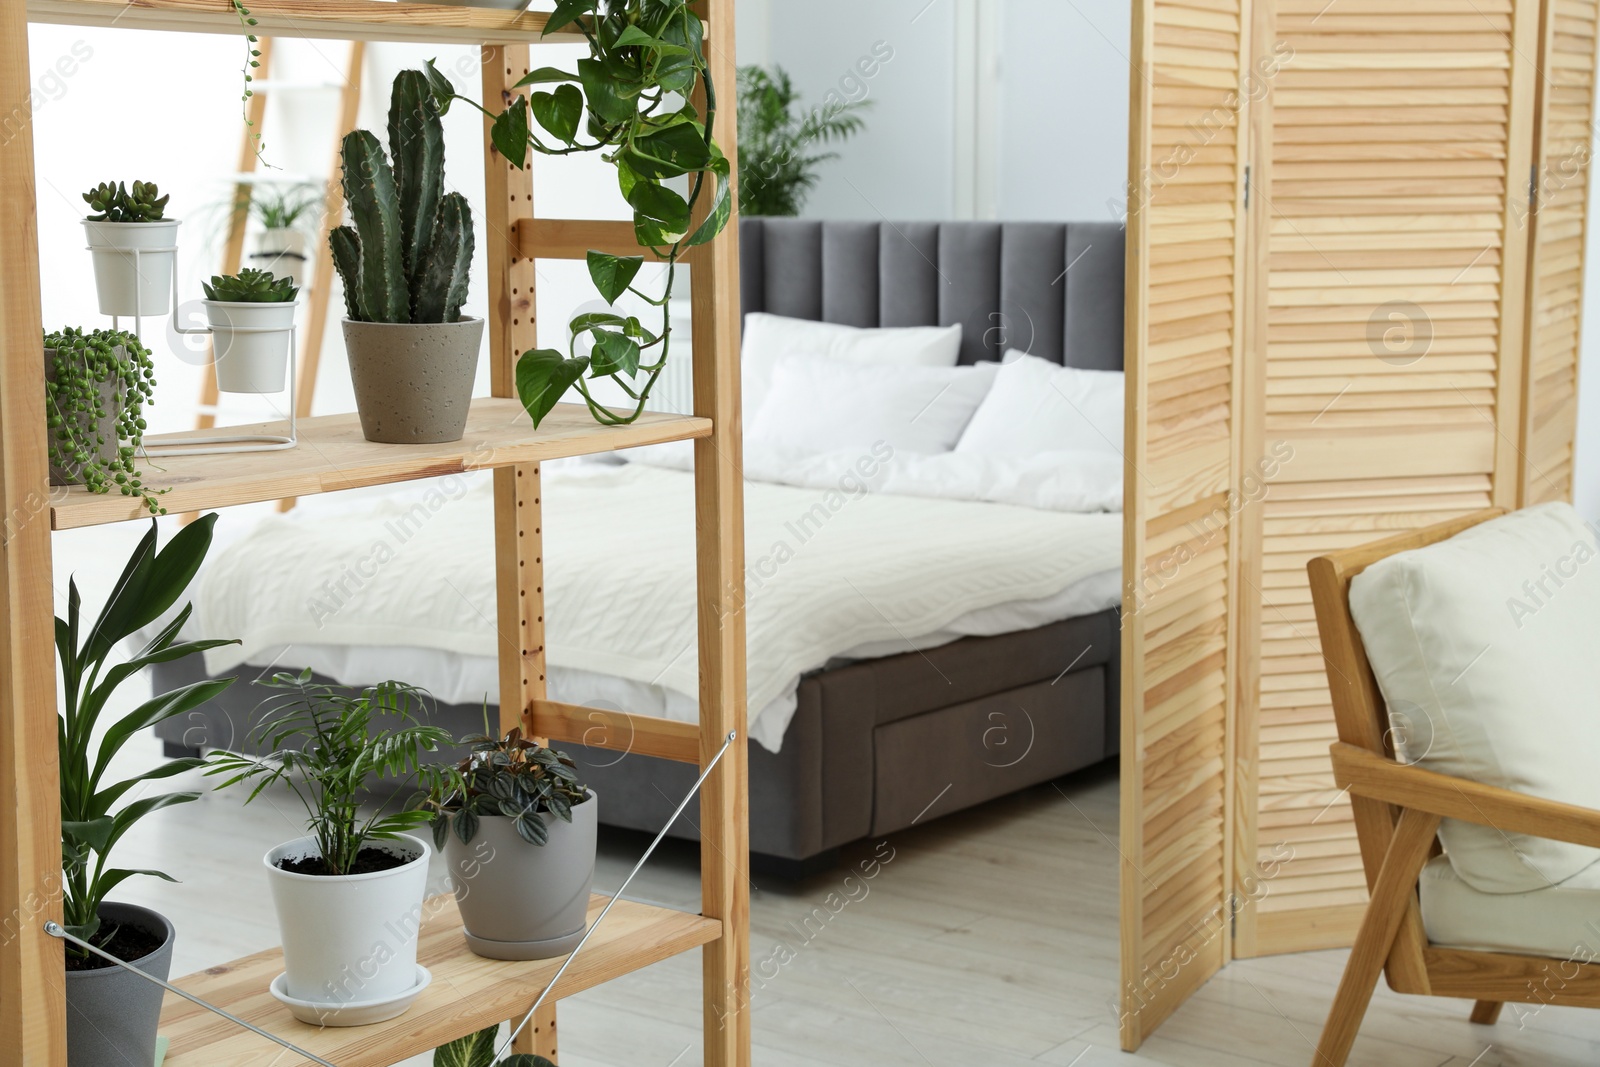 Photo of Stylish room with different potted green plants on shelving unit and comfortable bed